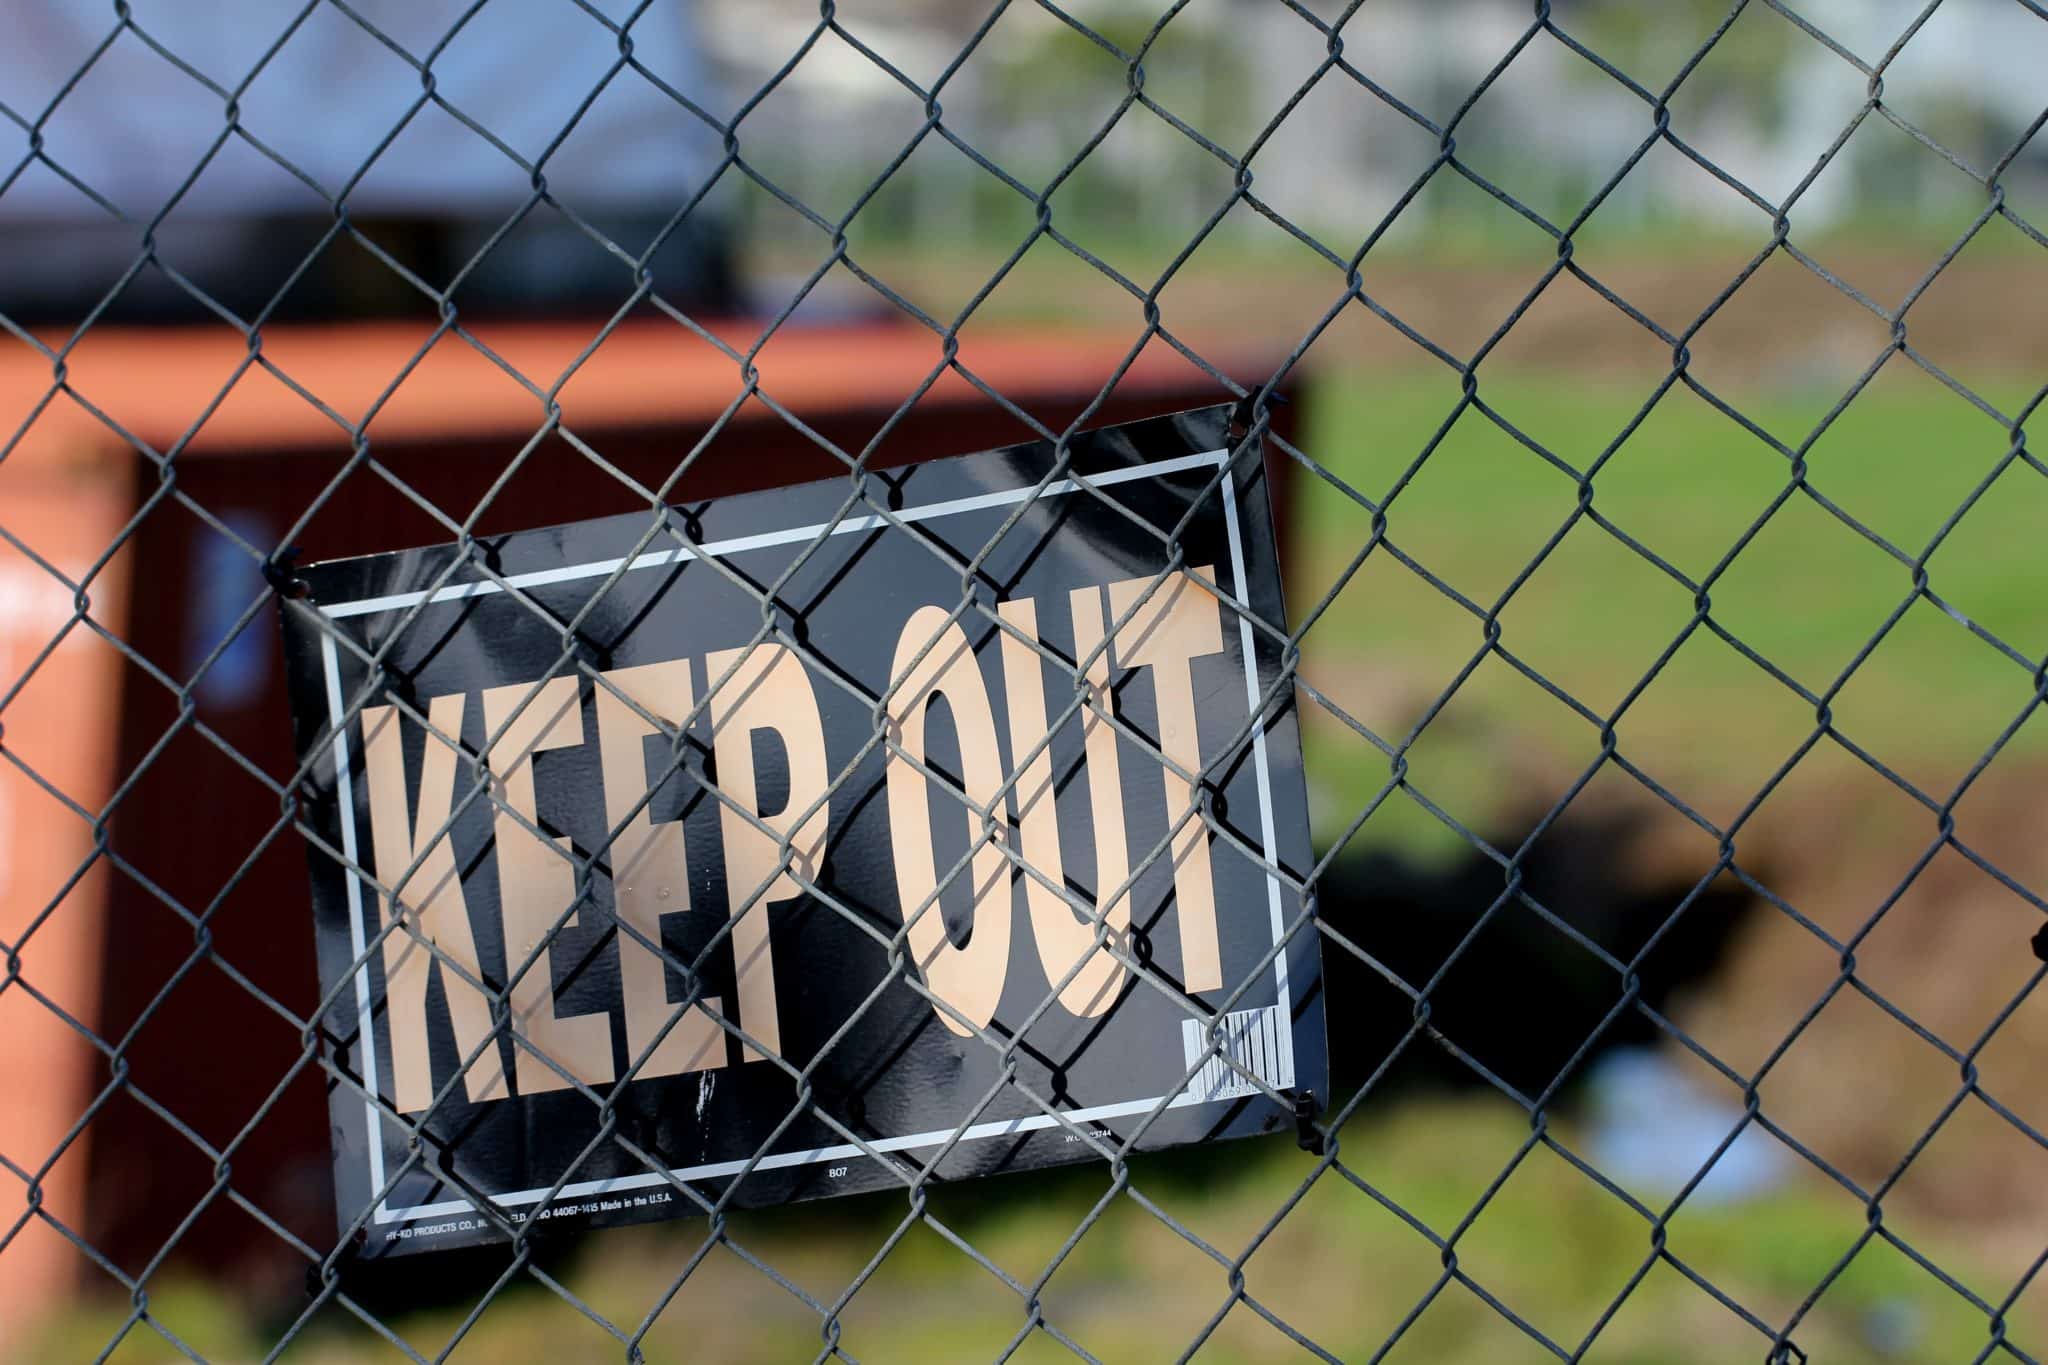 Sign reading "keep out" is attached to a wire fence